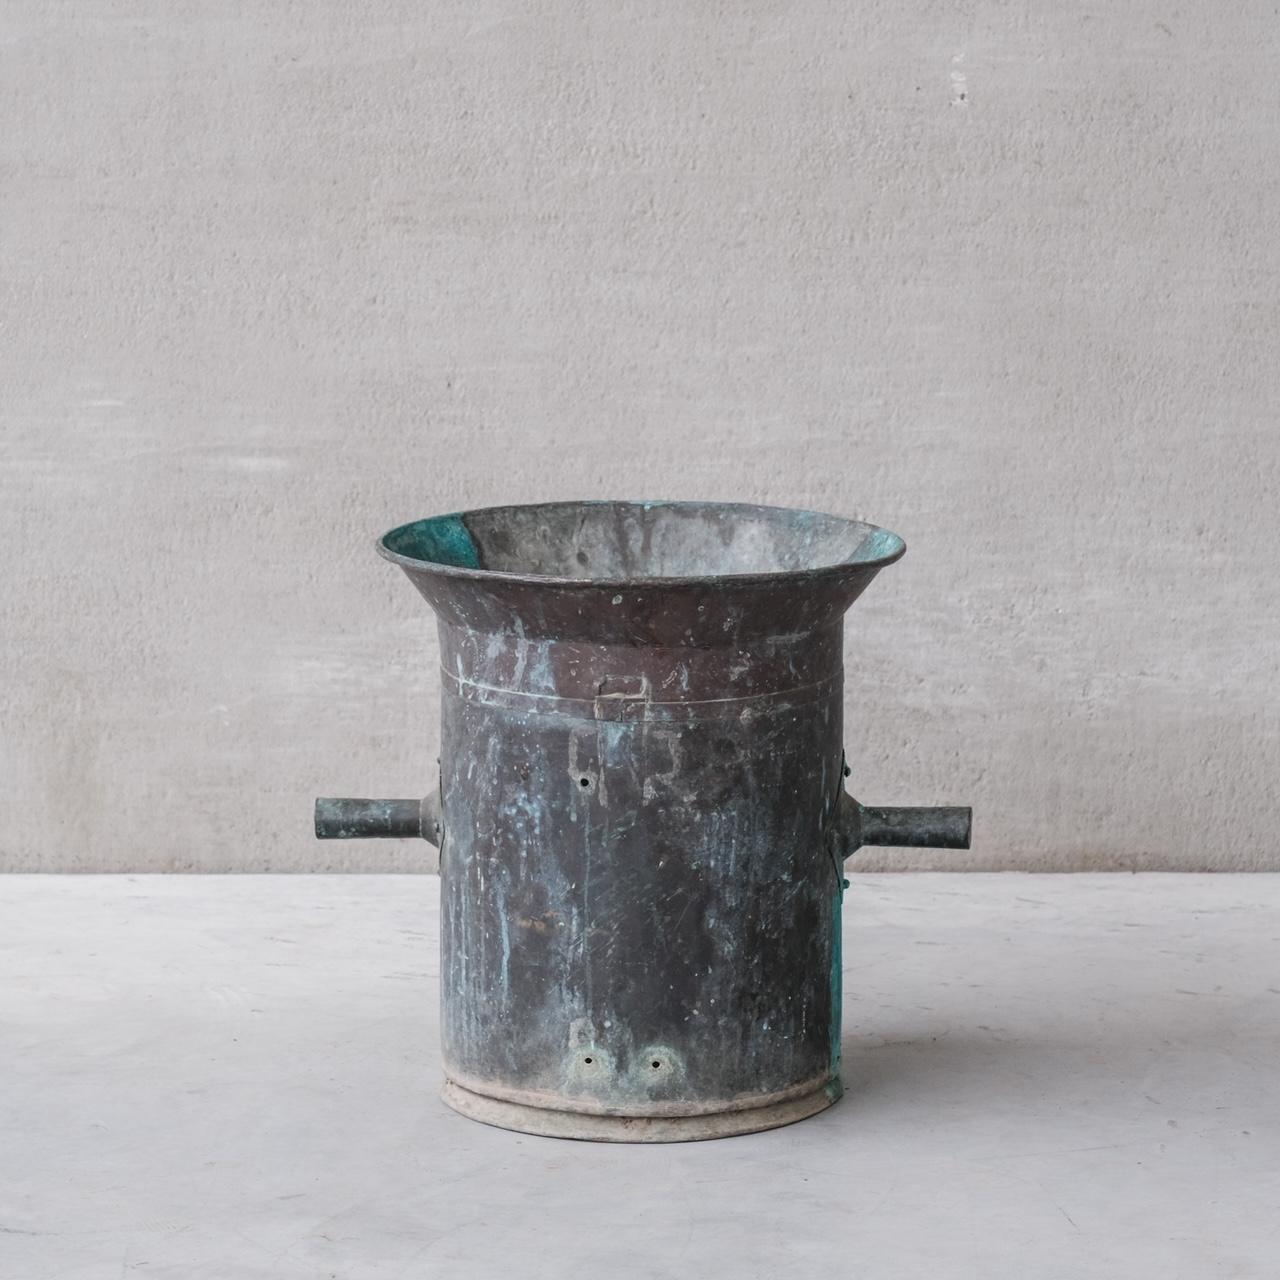 An increasingly rare copper planter with original and natural verdigris. 

France, c1950s. 

Unusual model with two handles. 

Ideal as a planter for indoors or external use. 

Some wear commensurate with age, but generally good condition.